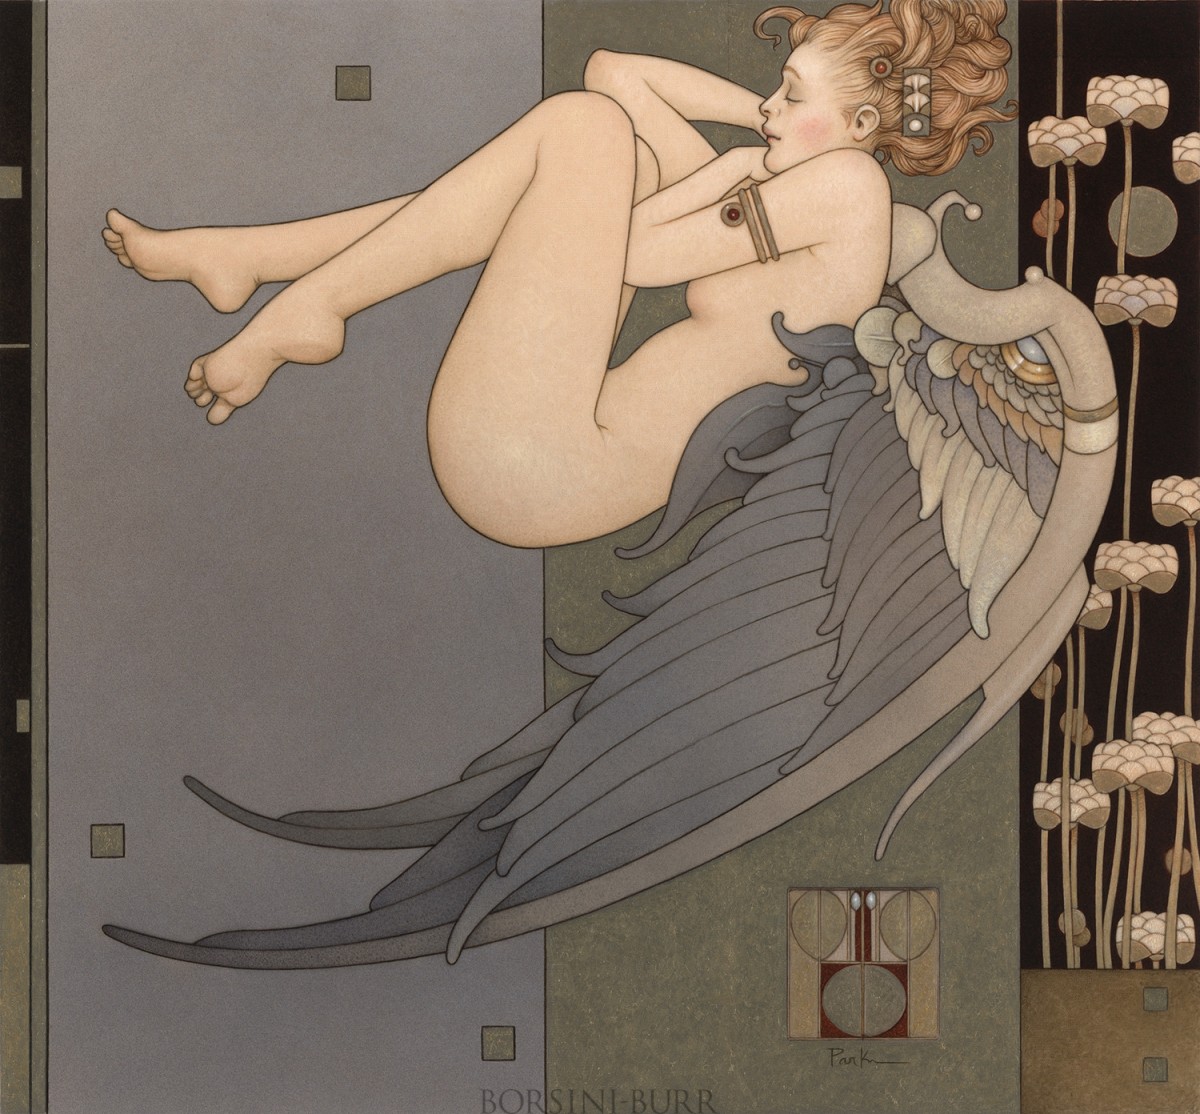 "Dreaming" Original Oil on Canvas by Michael Parkes